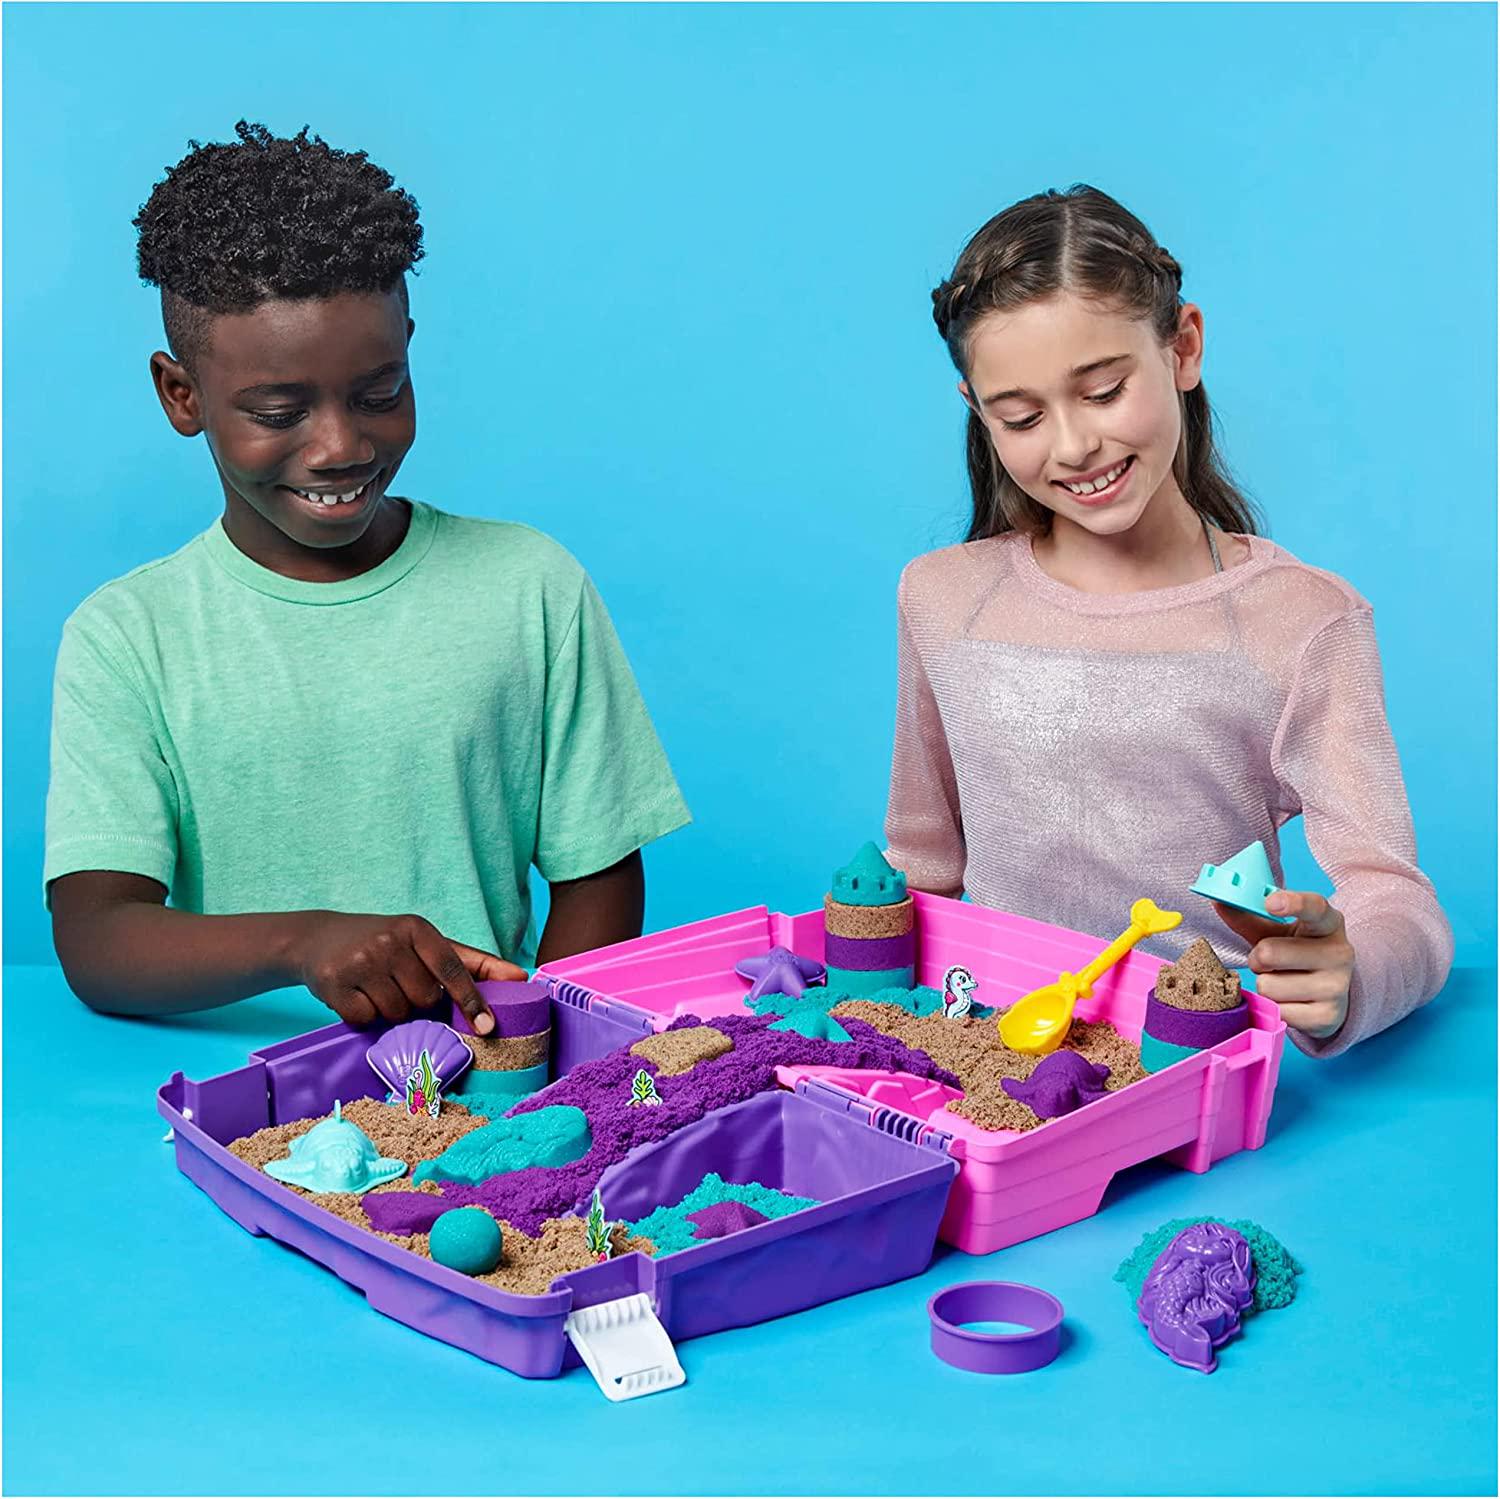 Kinetic Sand, Kinetic Sand, Mermaid Palace Playset, 2.06lbs of Shimmer Play Sand (Neon Purple, Shimmer Teal, and Beach Sand), Reusable Folding Sandbox and Tools, Sensory Toys for Kids Ages 3 and up